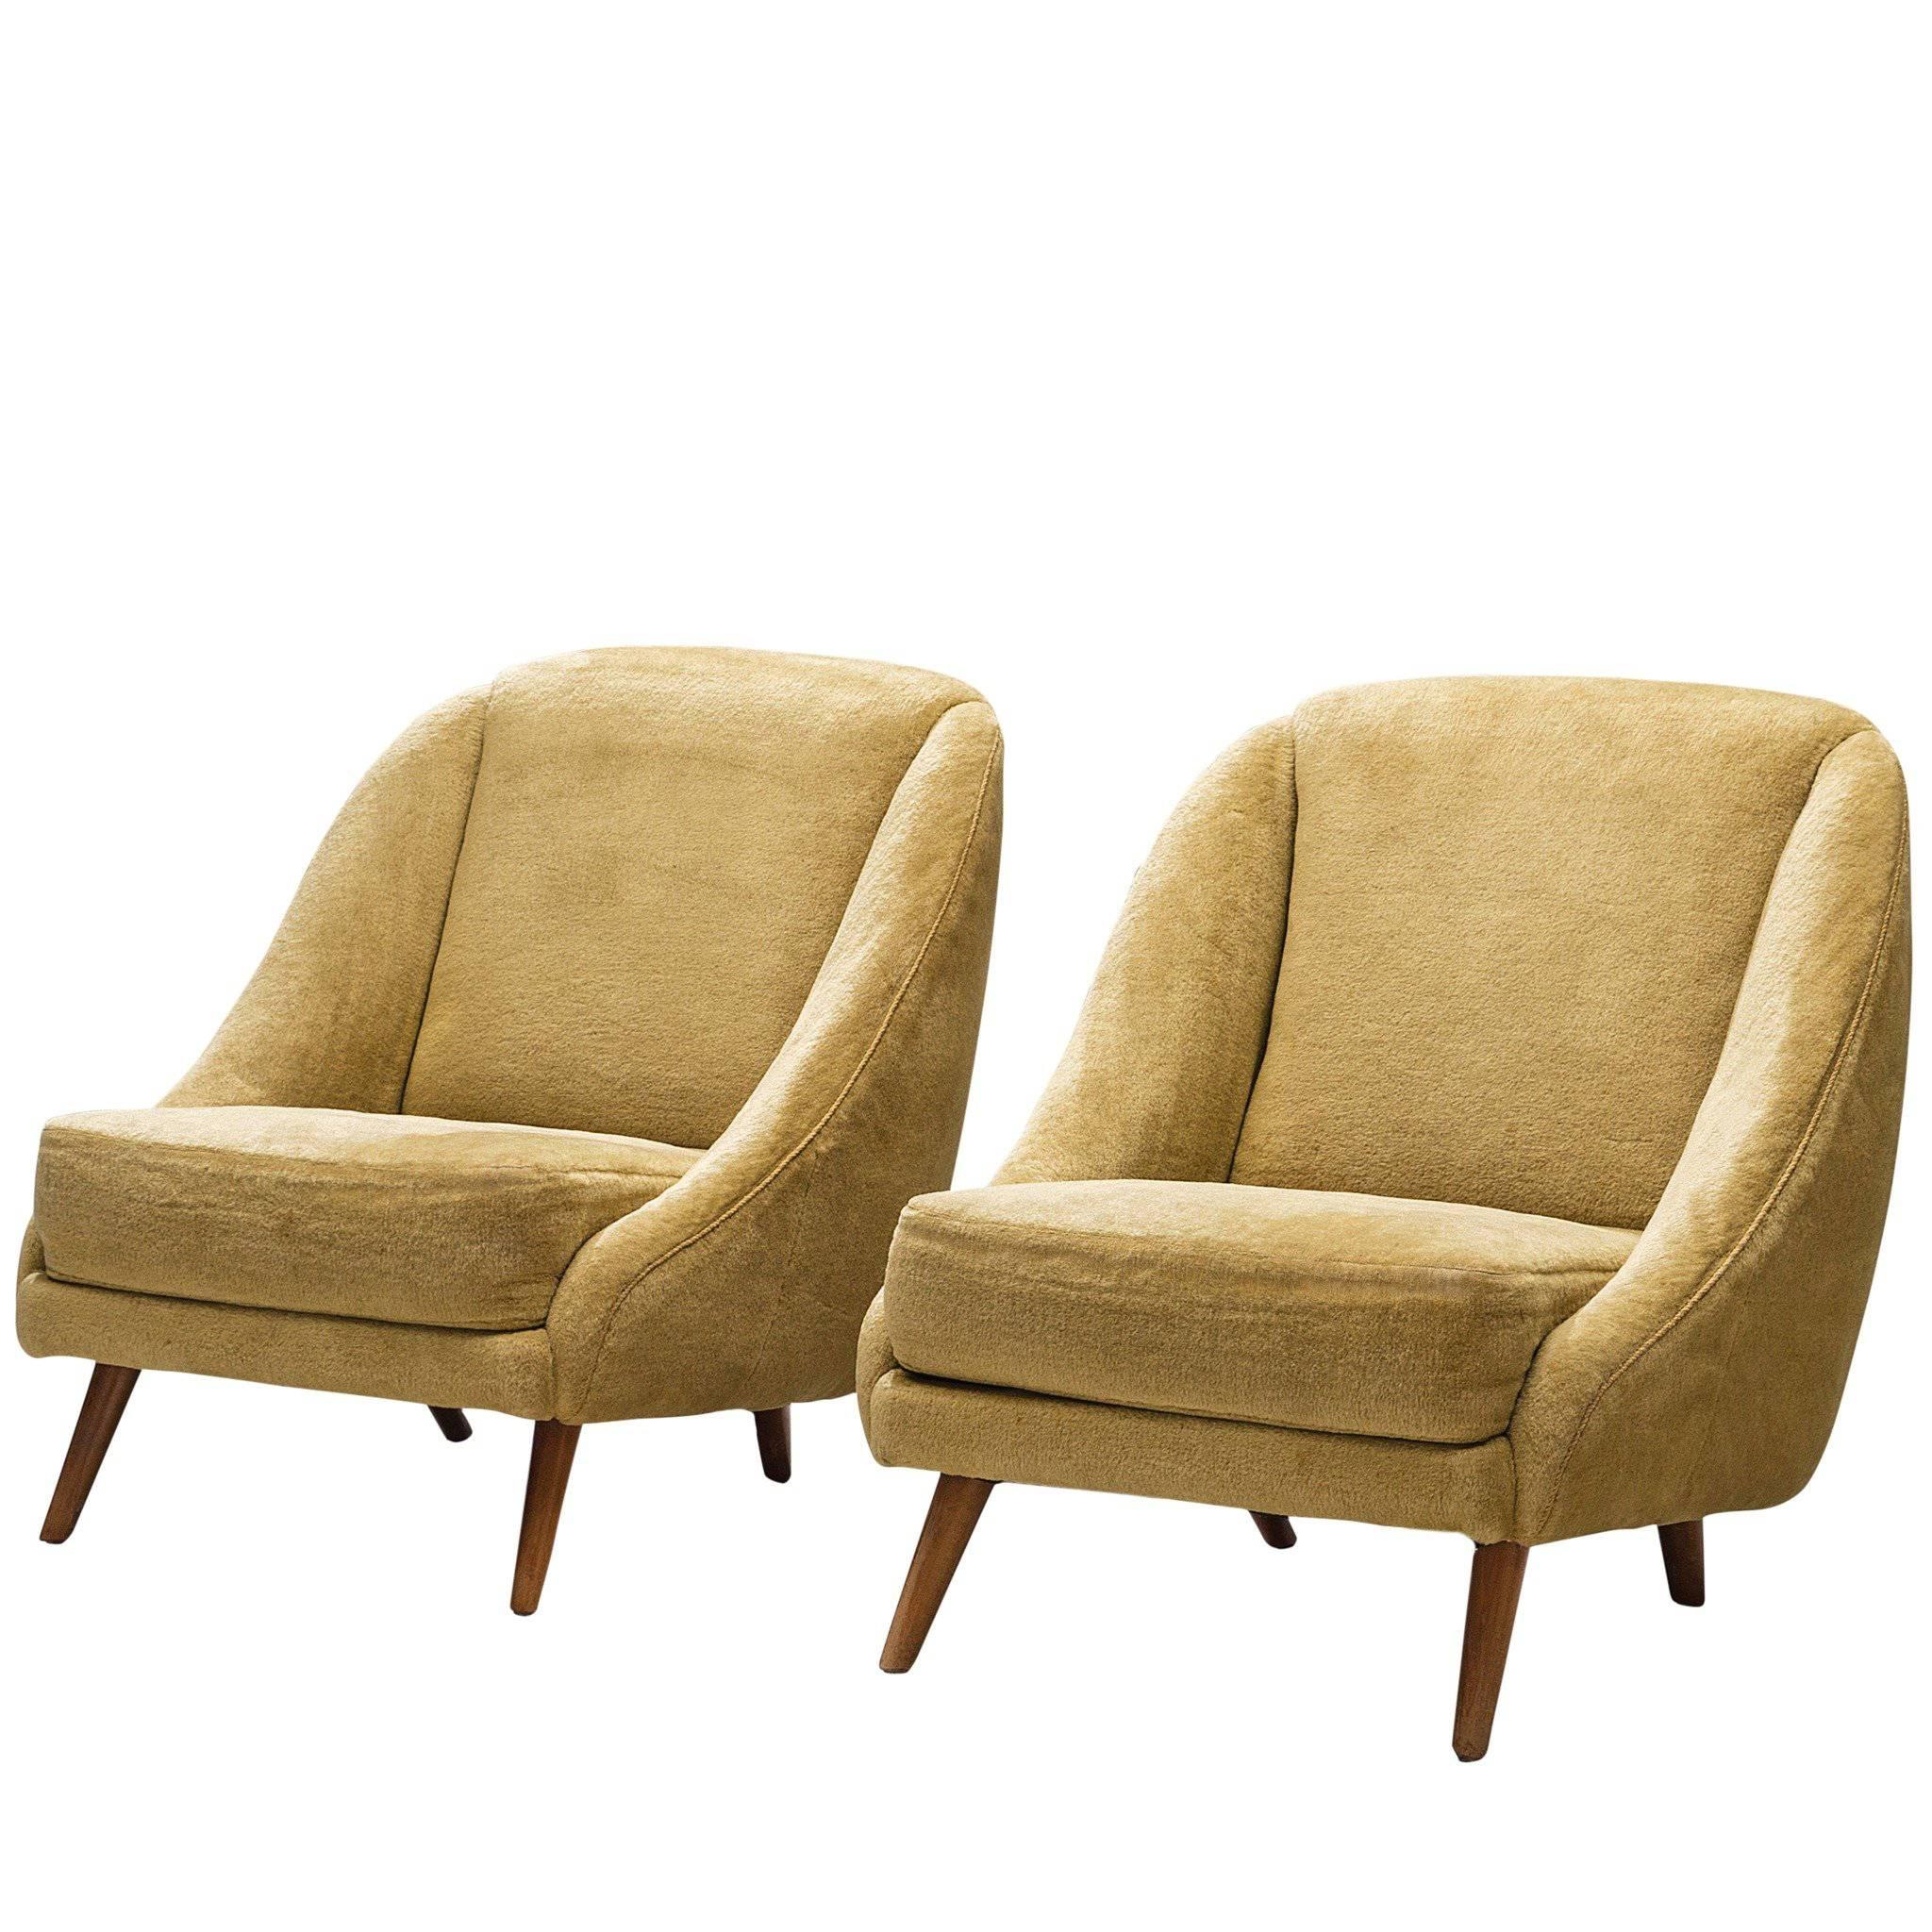 Pair of French Shell Club Chairs